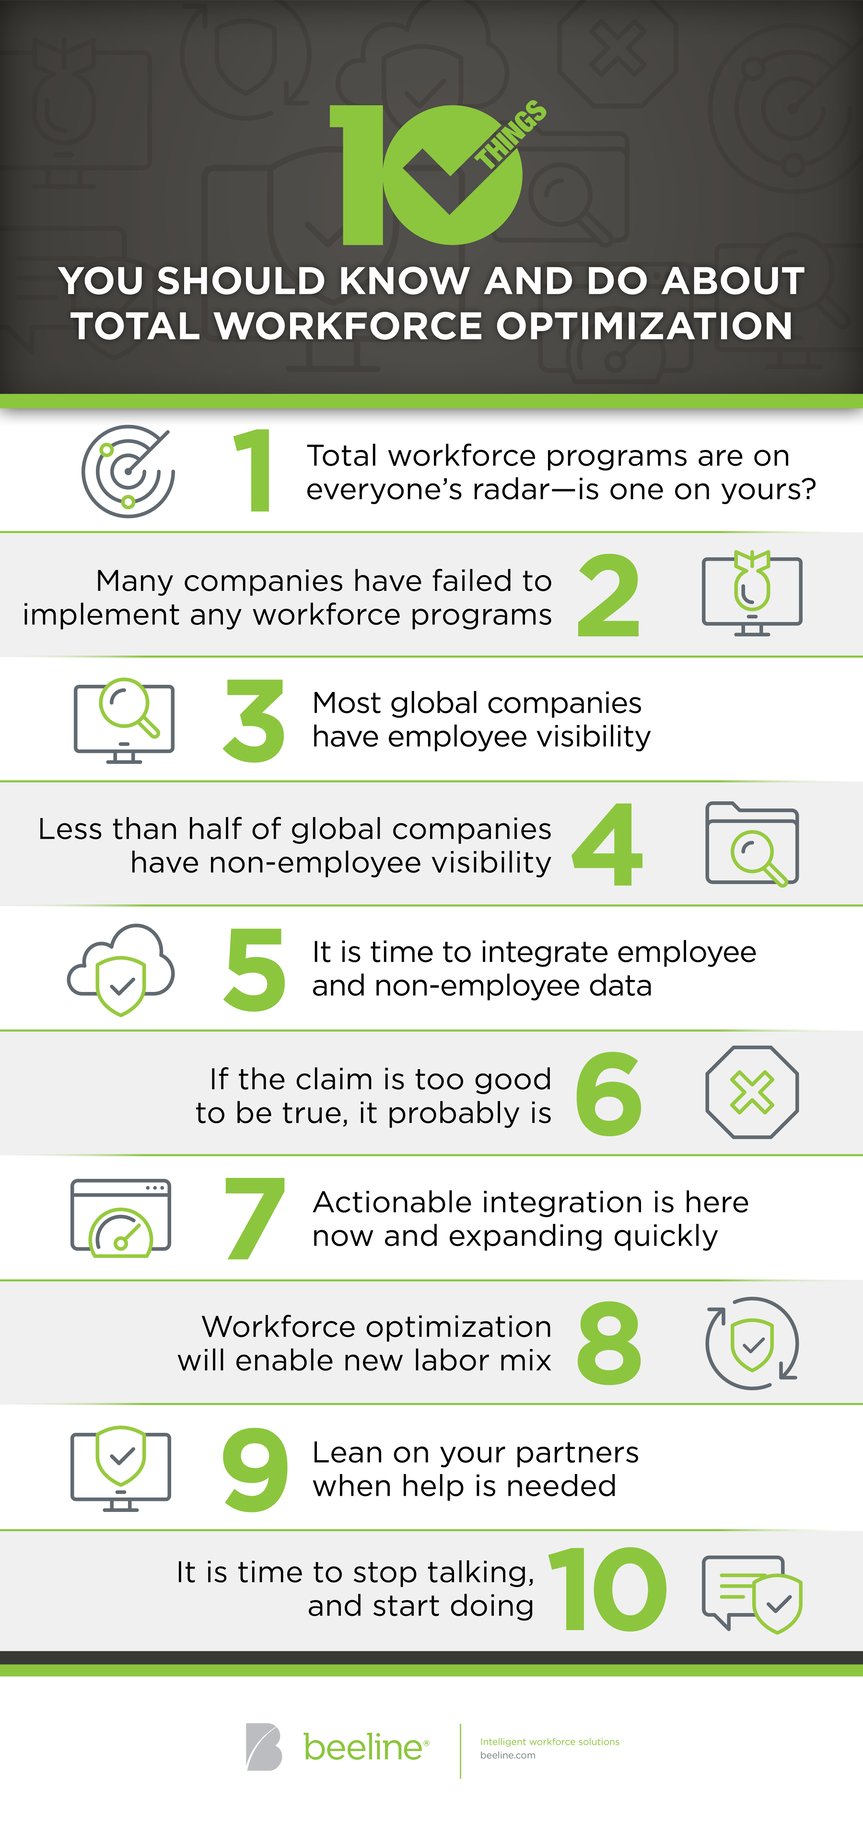 2018-Beeline_10-Things-You-Should-Know-and-Do-About-Total-Workforce-Optimization-_Infographic